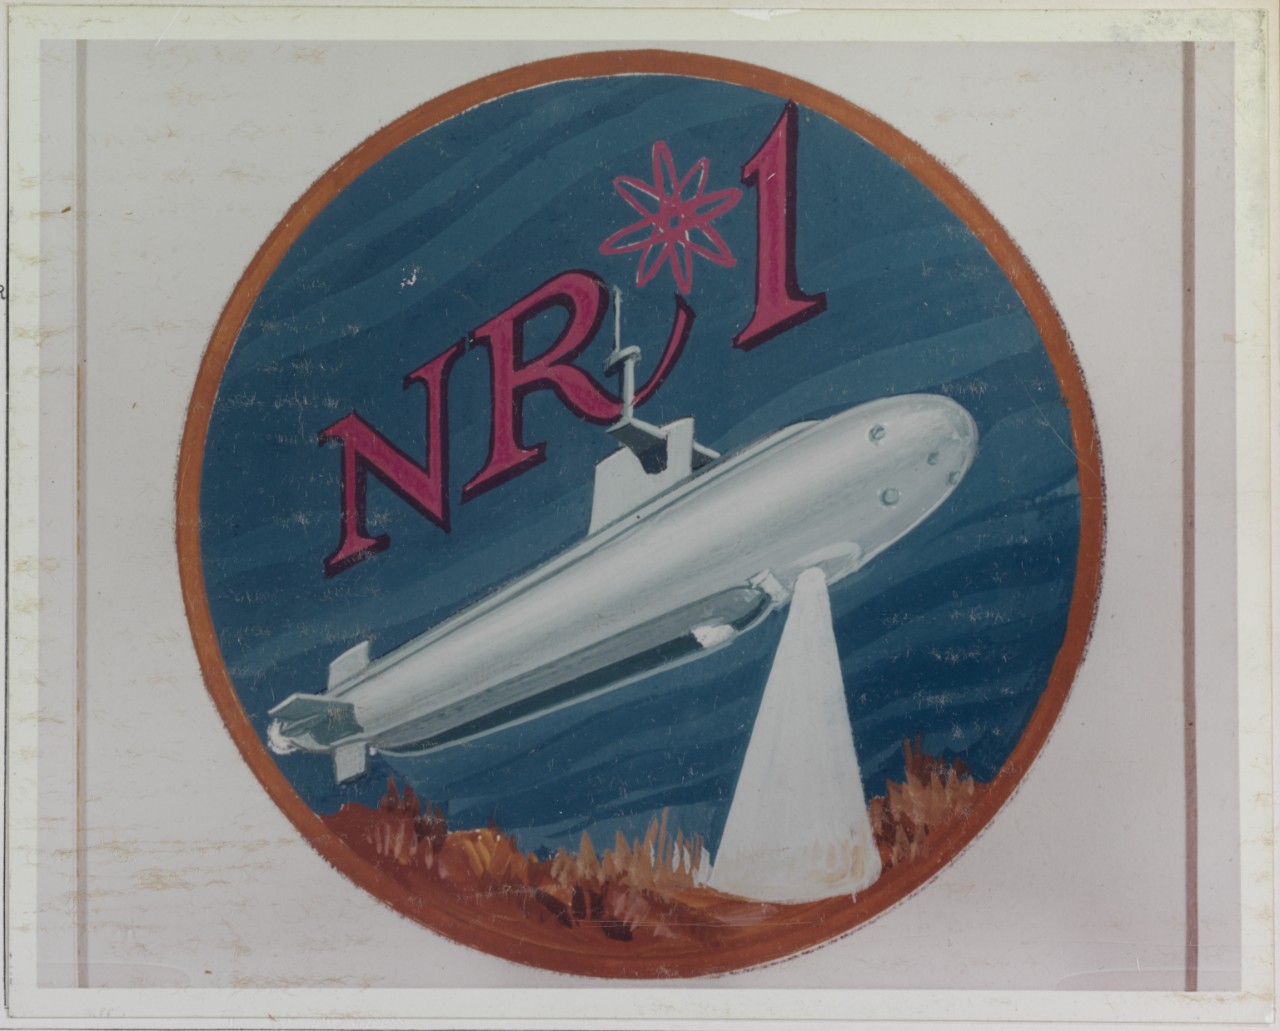 Insignia: NR-1 Navy Research Submarine